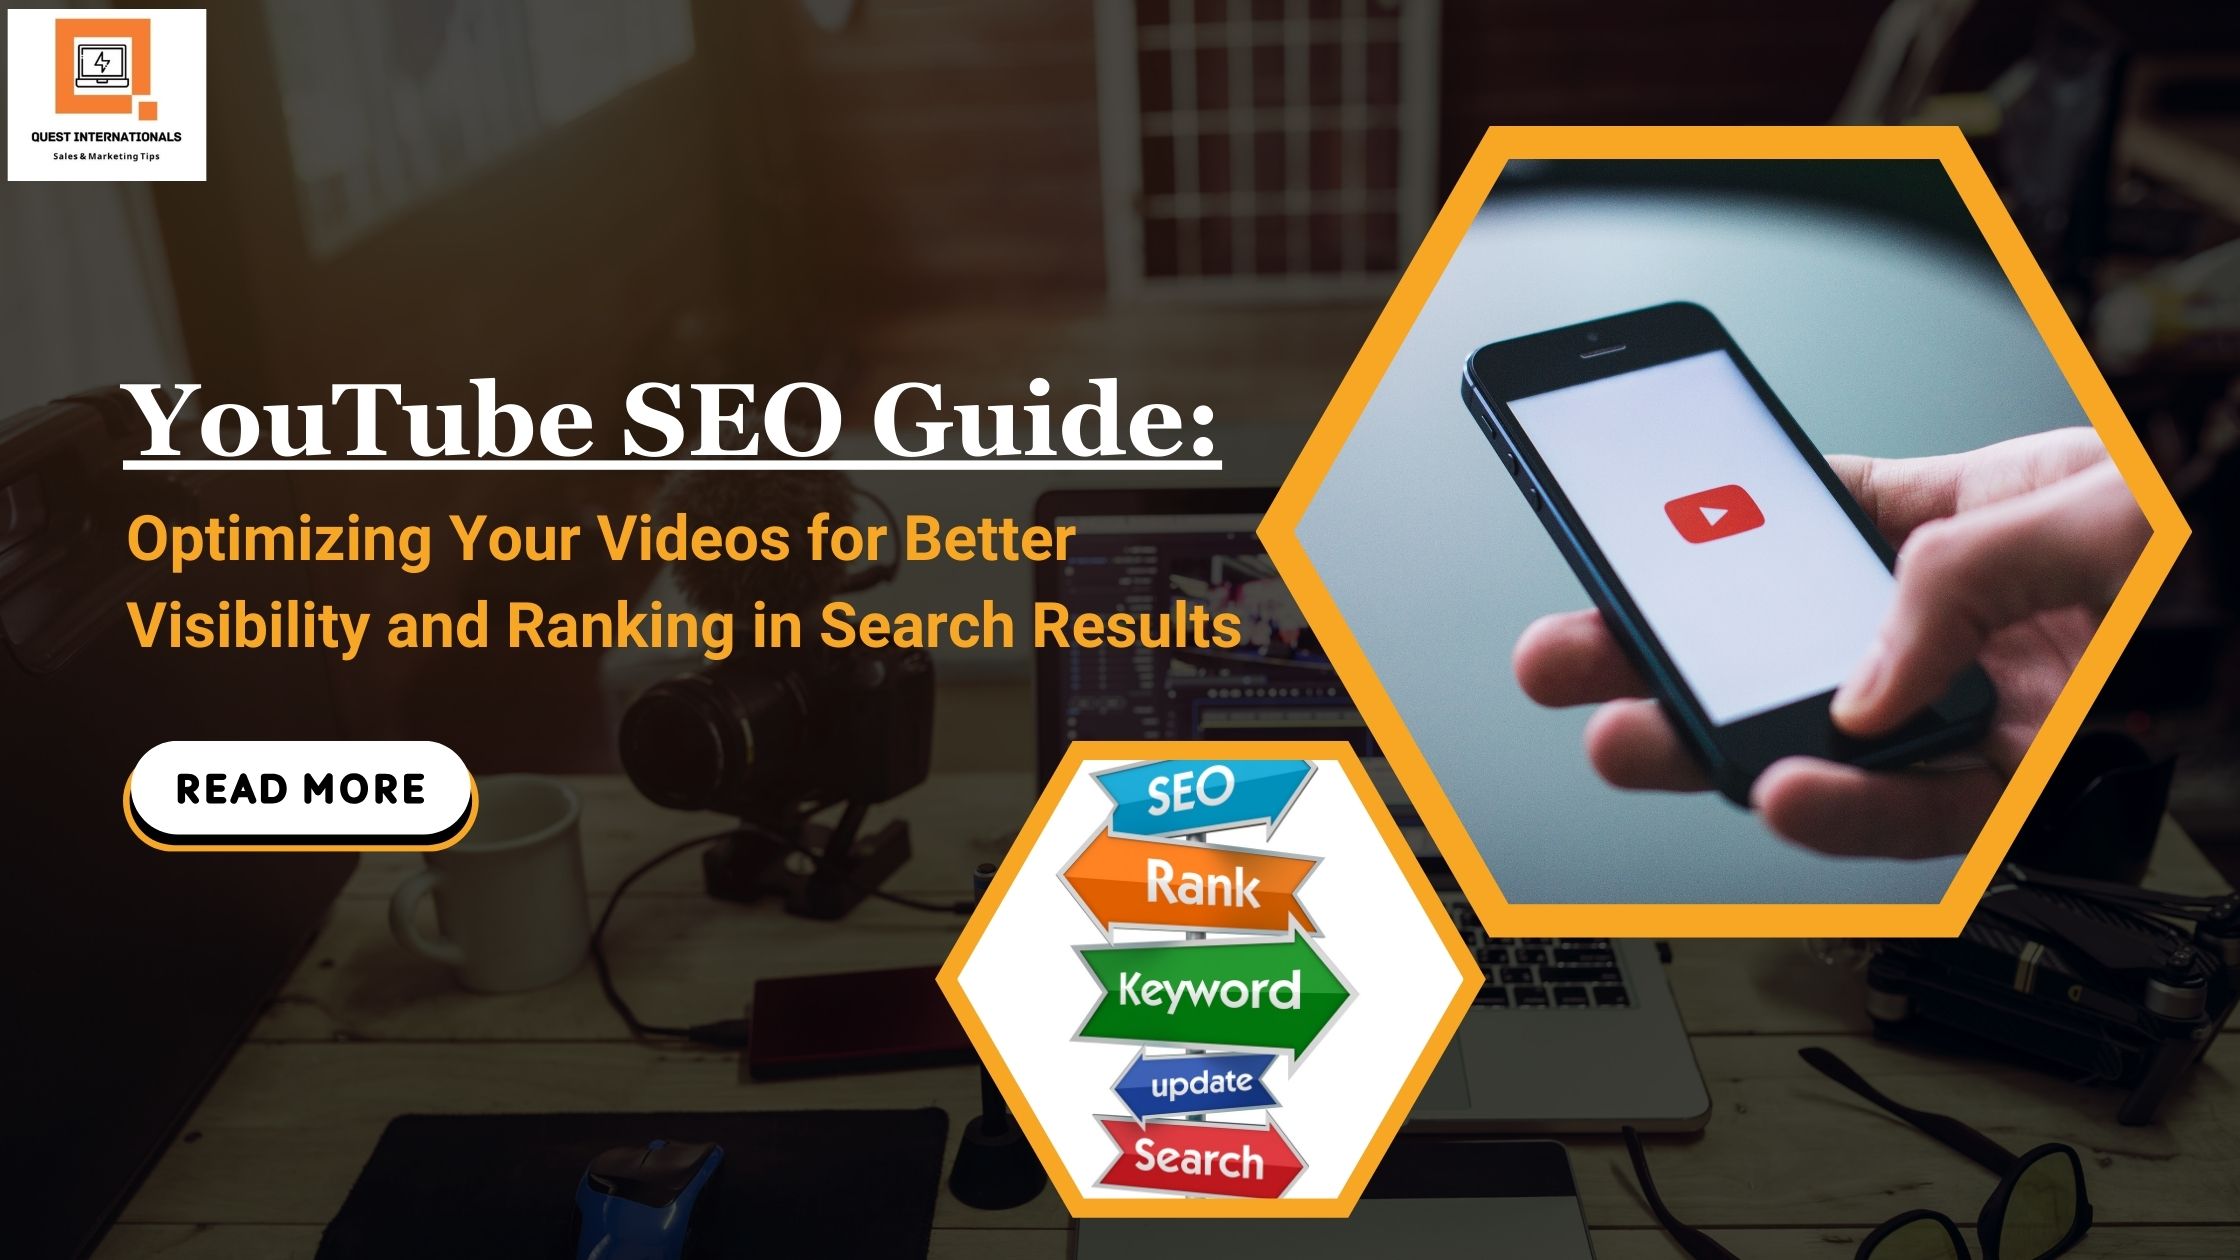 You are currently viewing YouTube SEO Guide: Optimizing Your Videos for Better Visibility and Ranking in Search Results